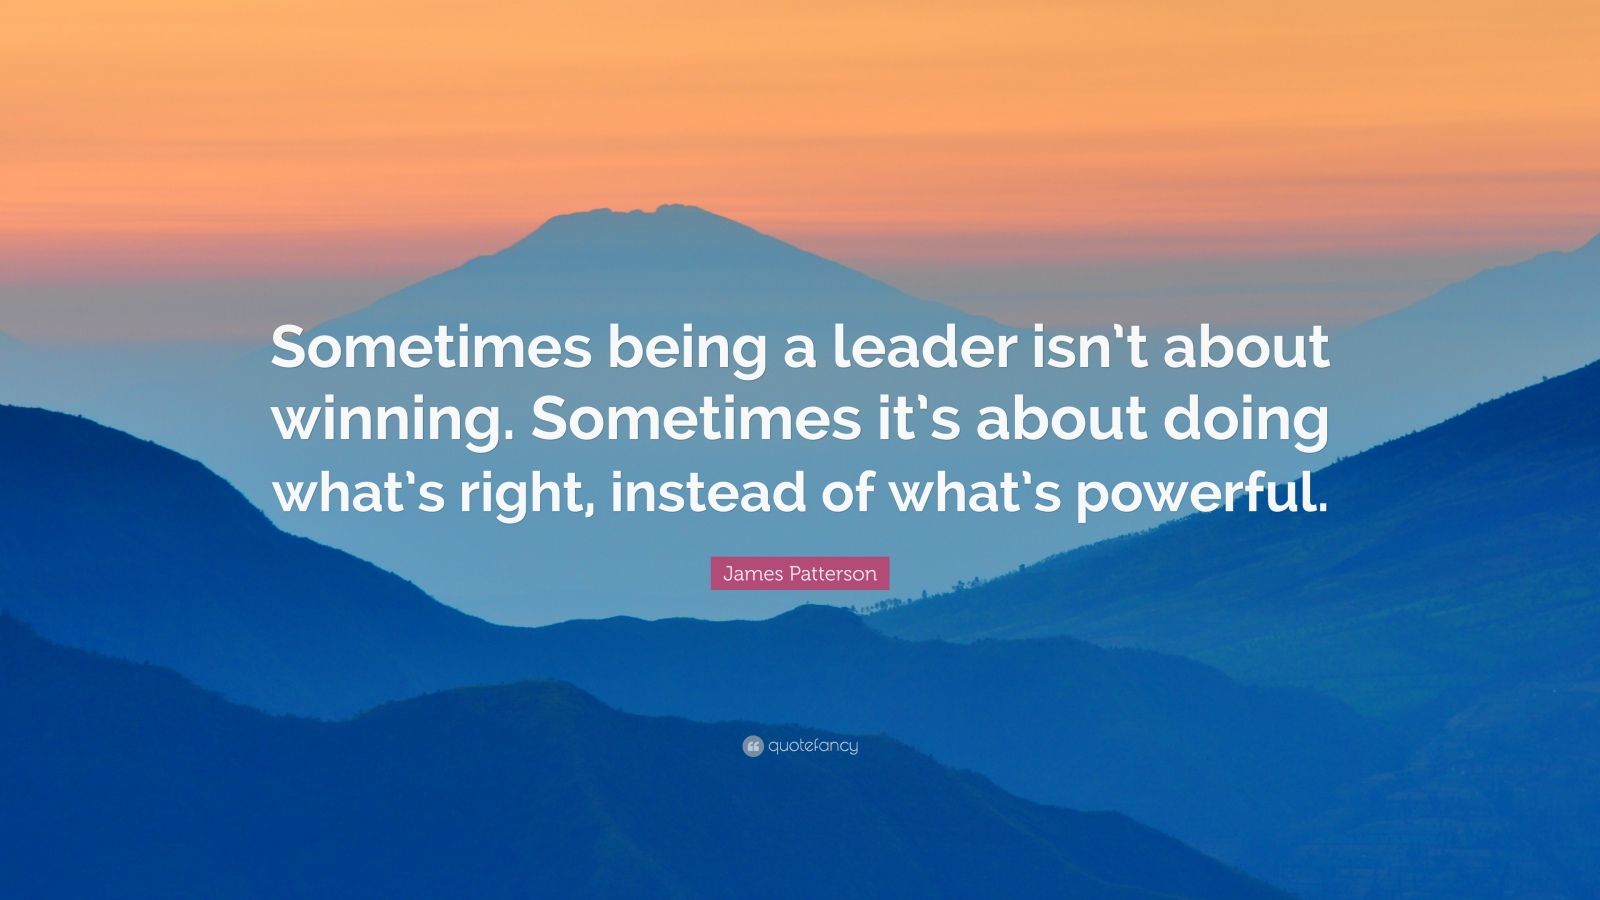 James Patterson Quote: “Sometimes being a leader isn’t about winning